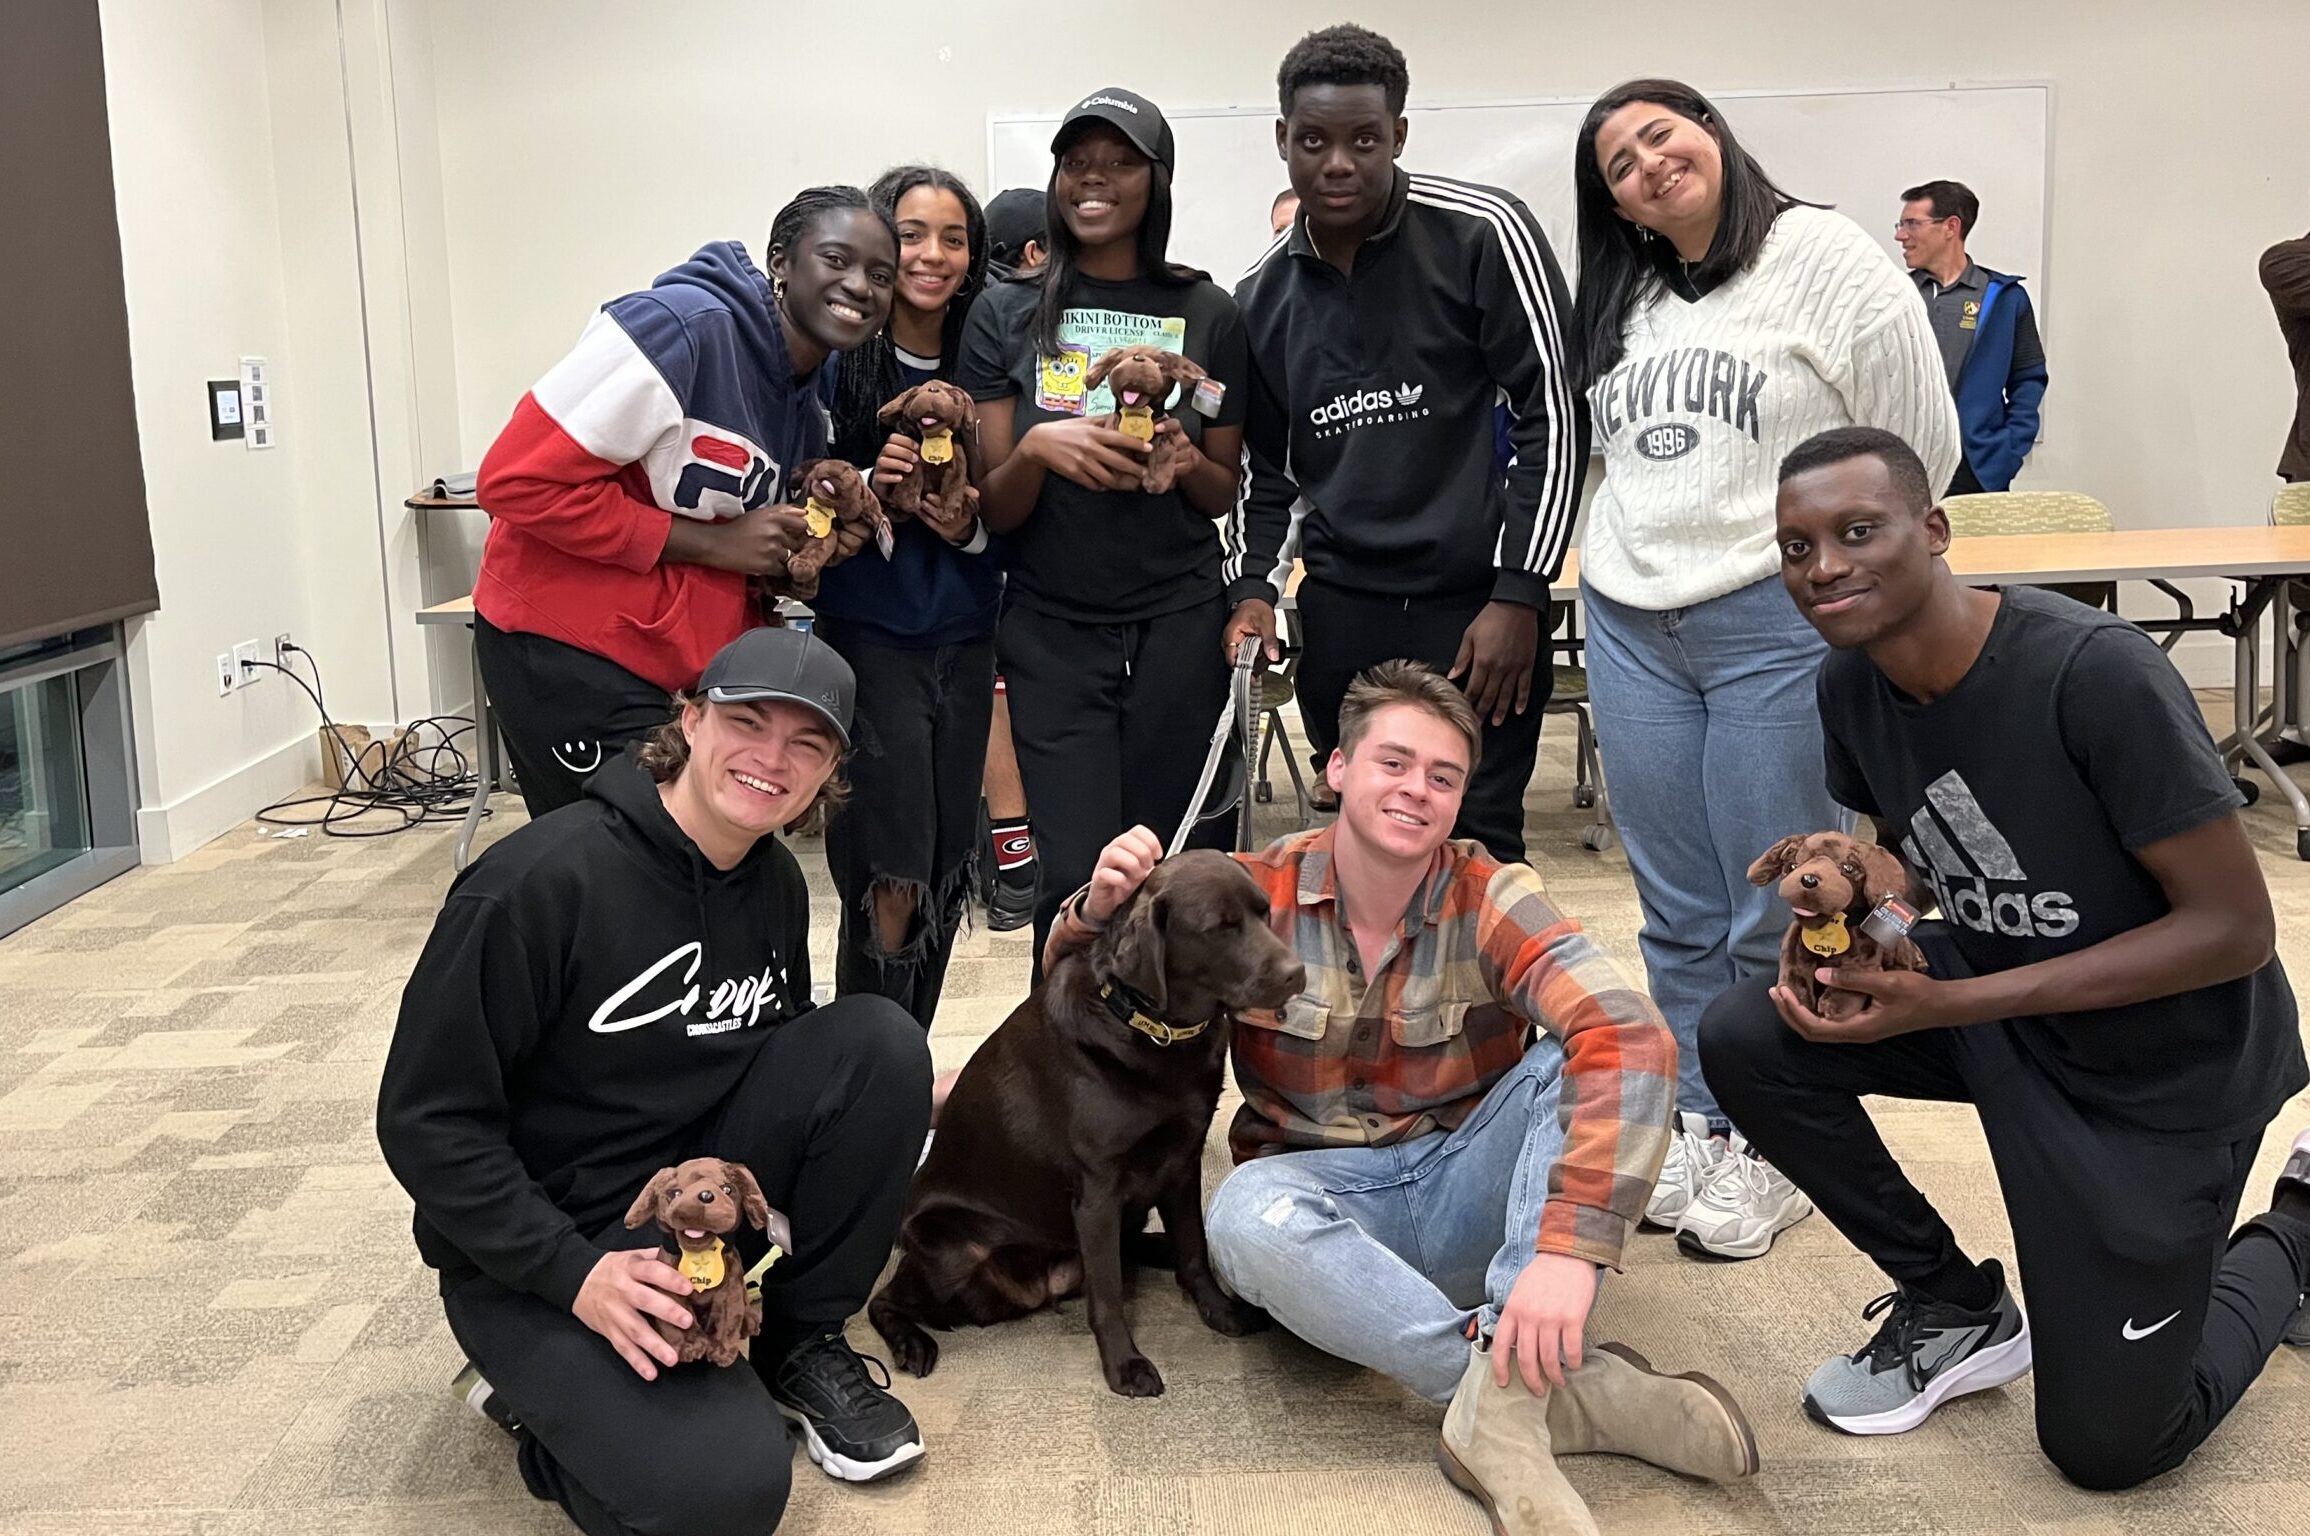 Leading through service: Meet the community builders in UMBC’s Class of 2023